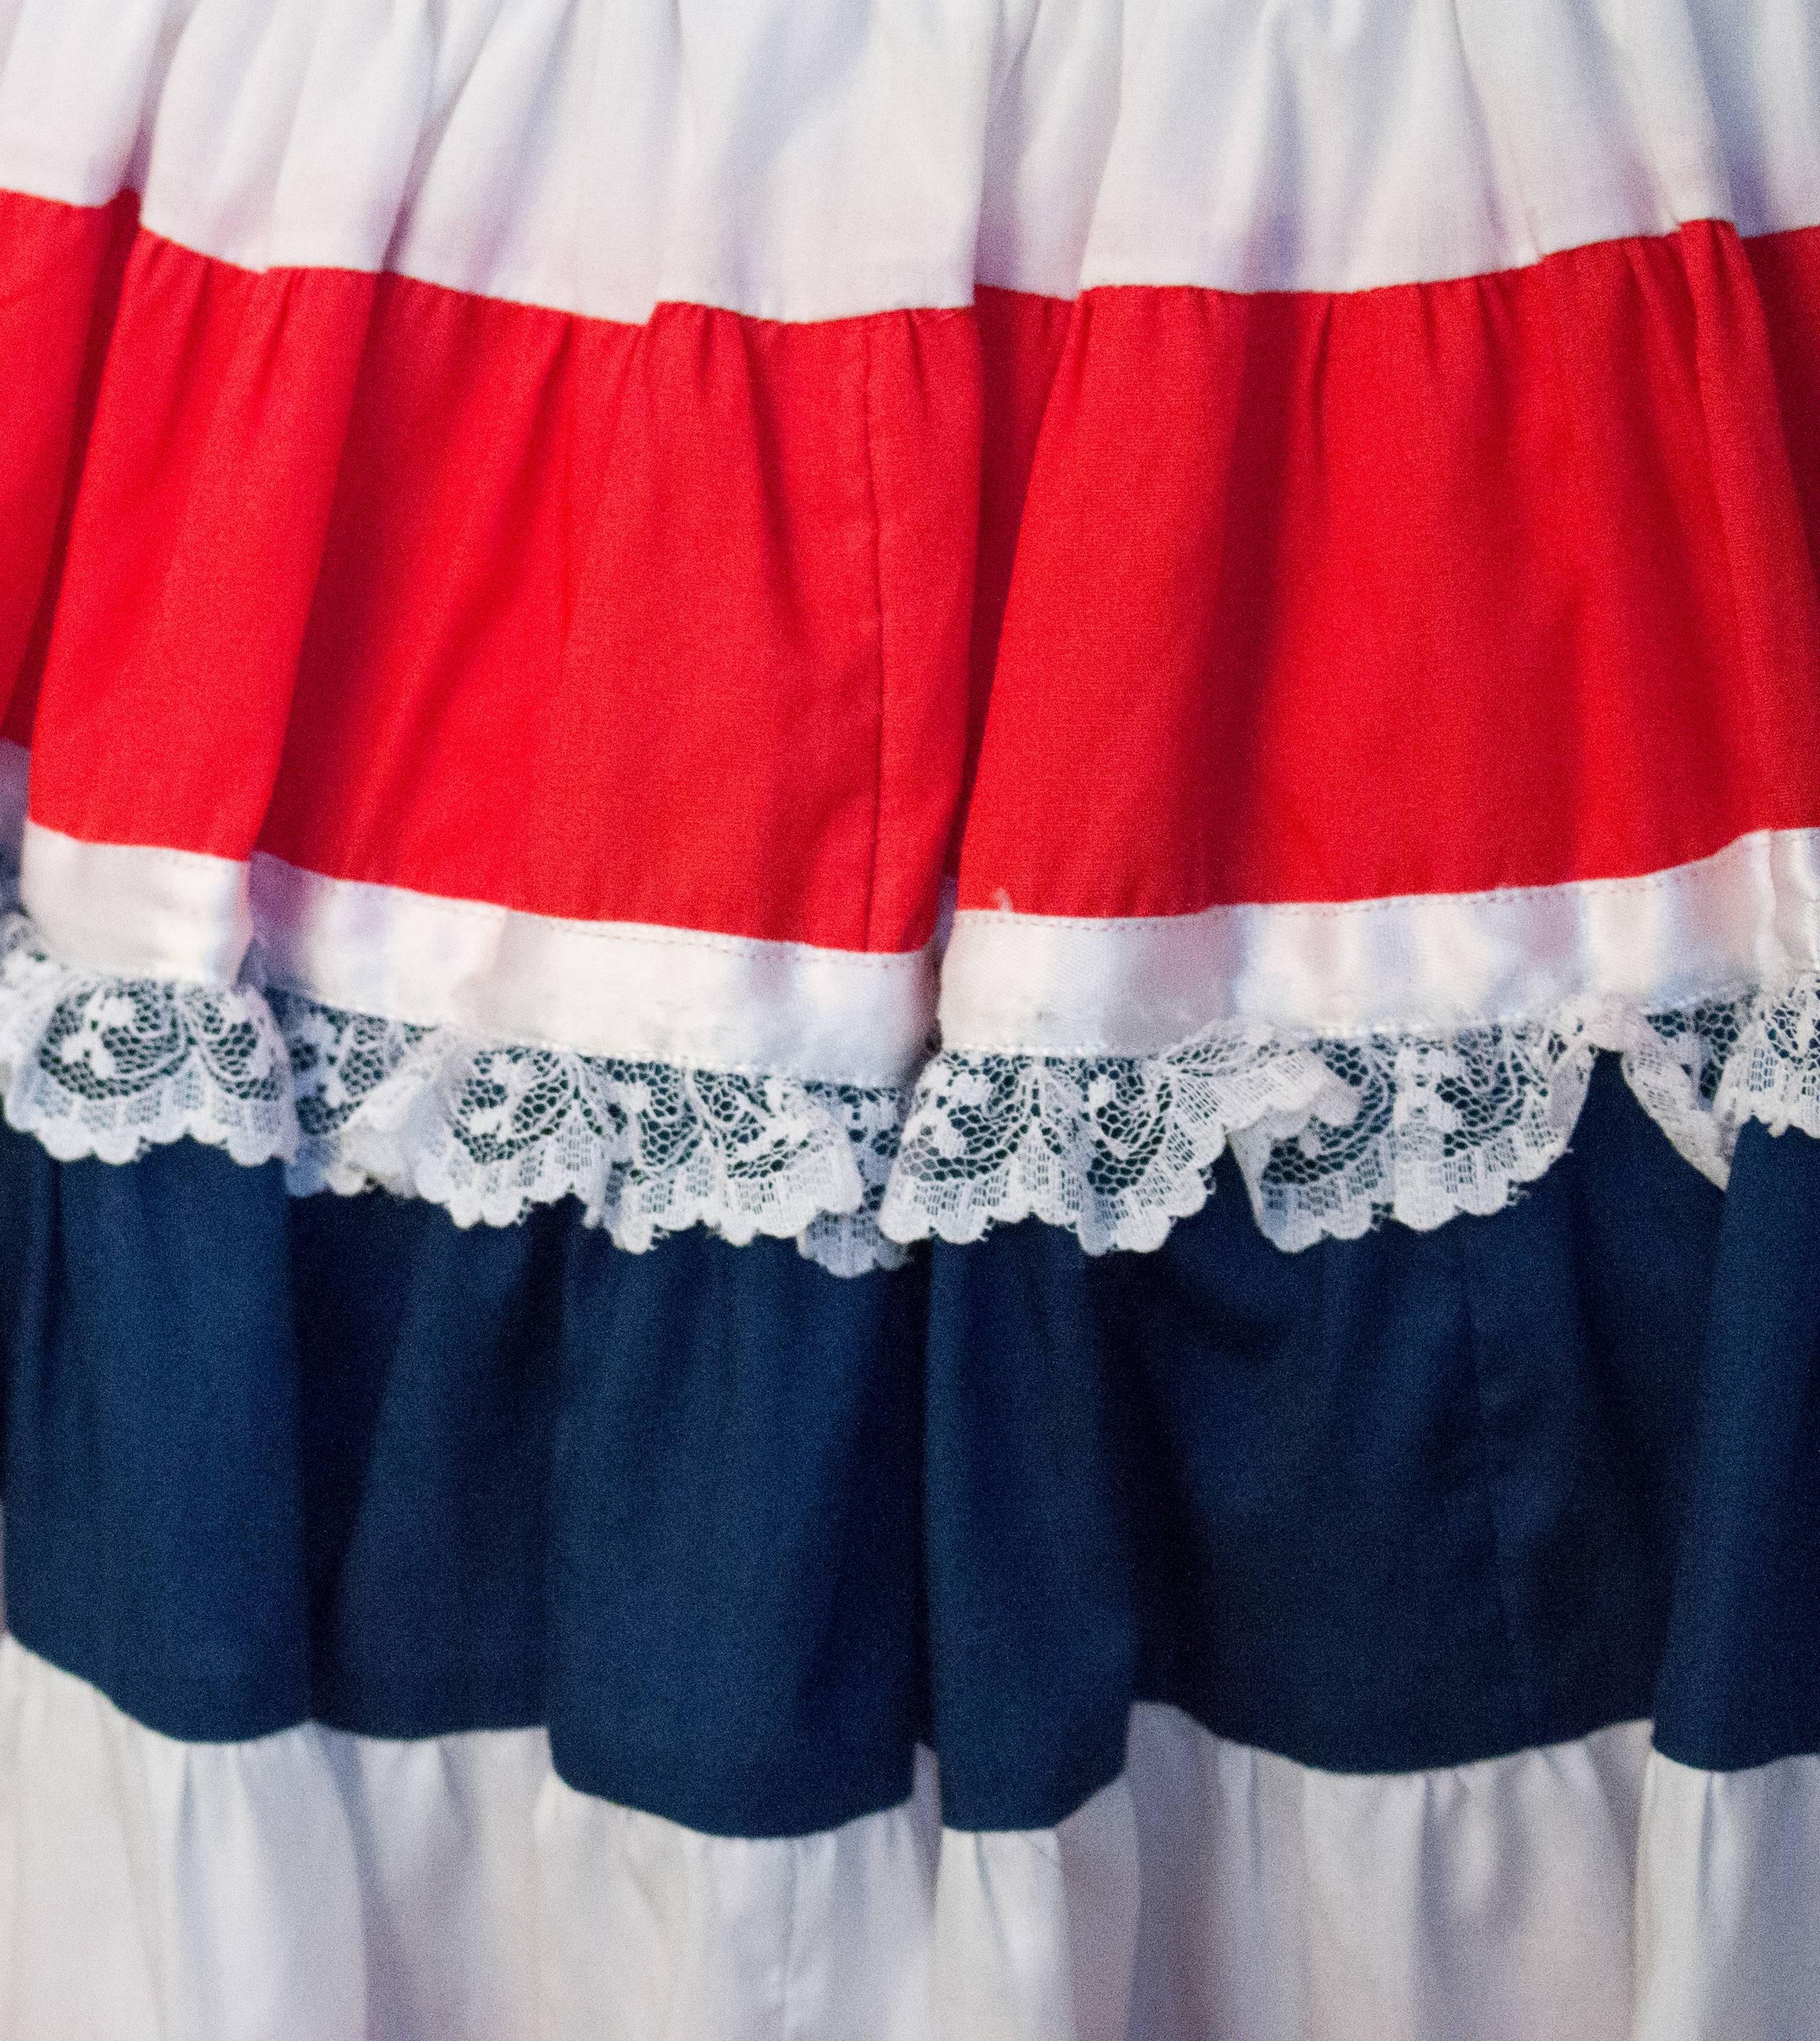 Gray 60s Red White and Blue Ruffle Skirt with Lace Trim